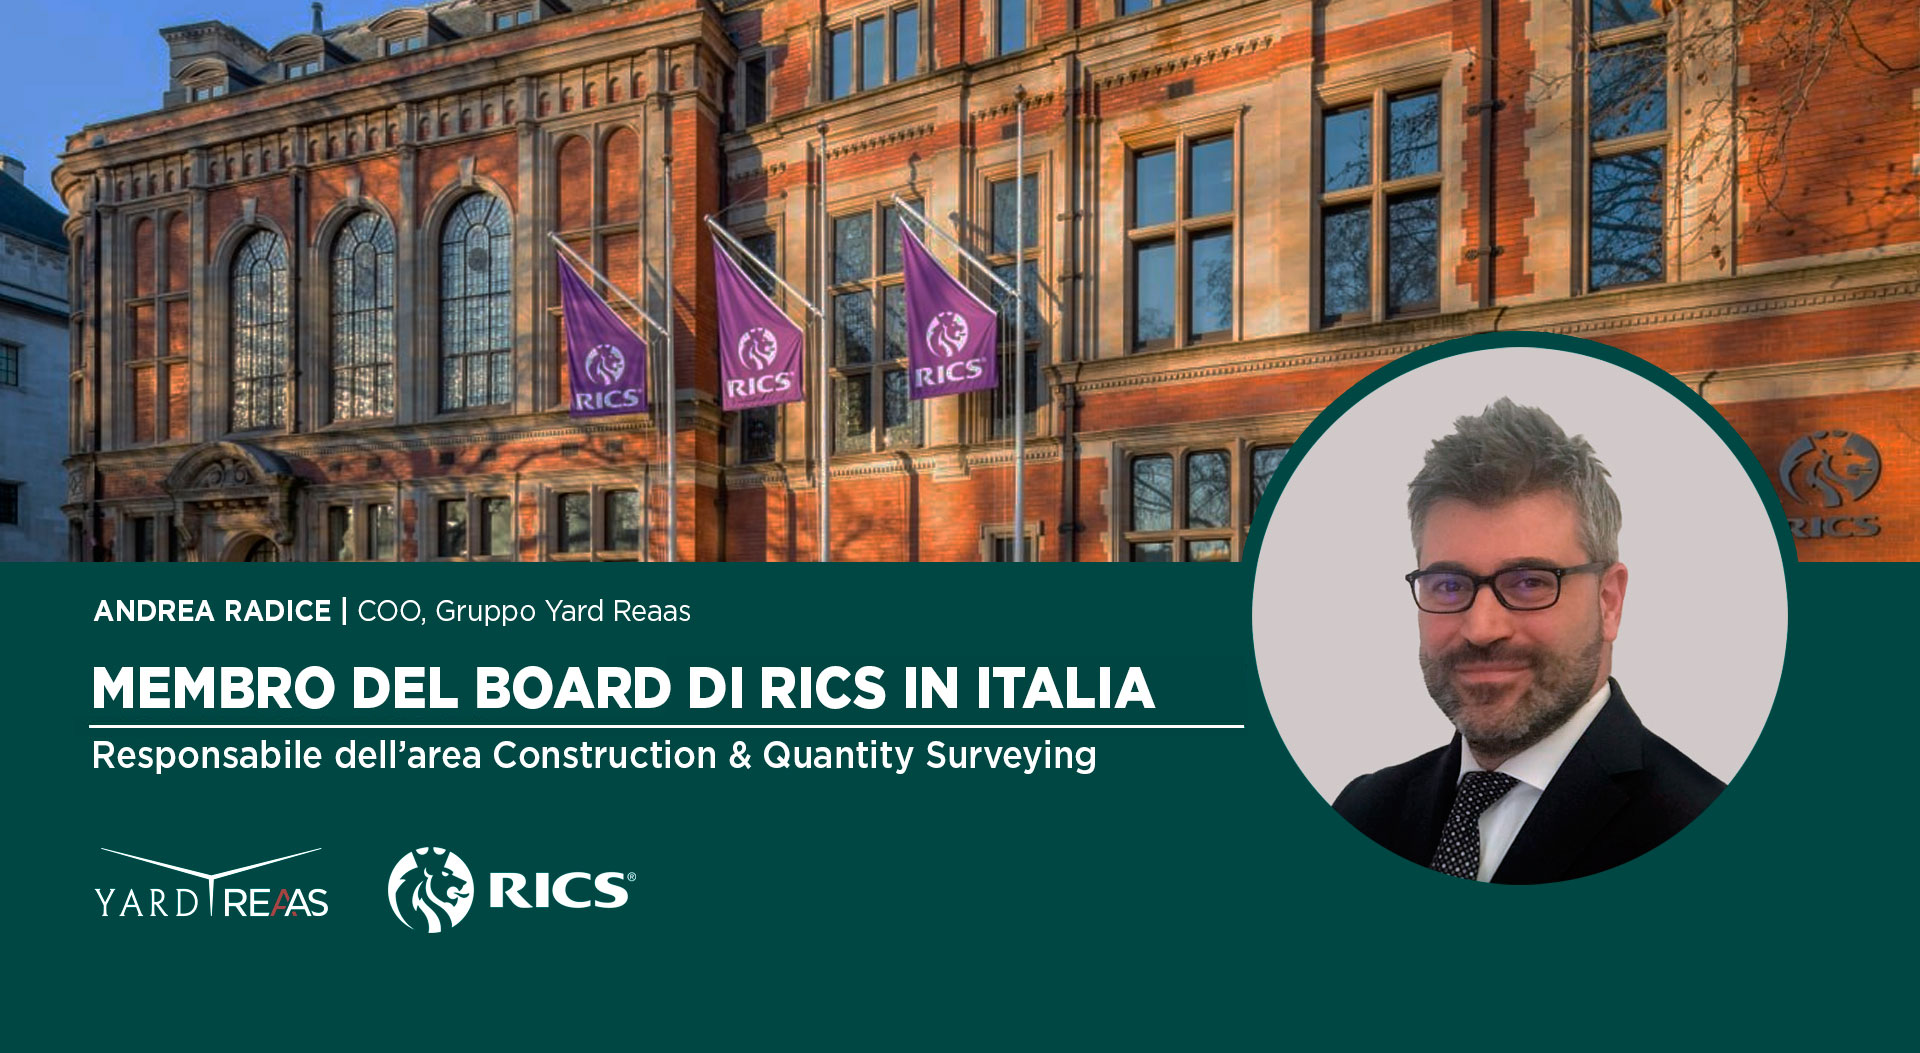 Andrea Radice appointed as member of the new Regional Advisory Board of RICS in Italy